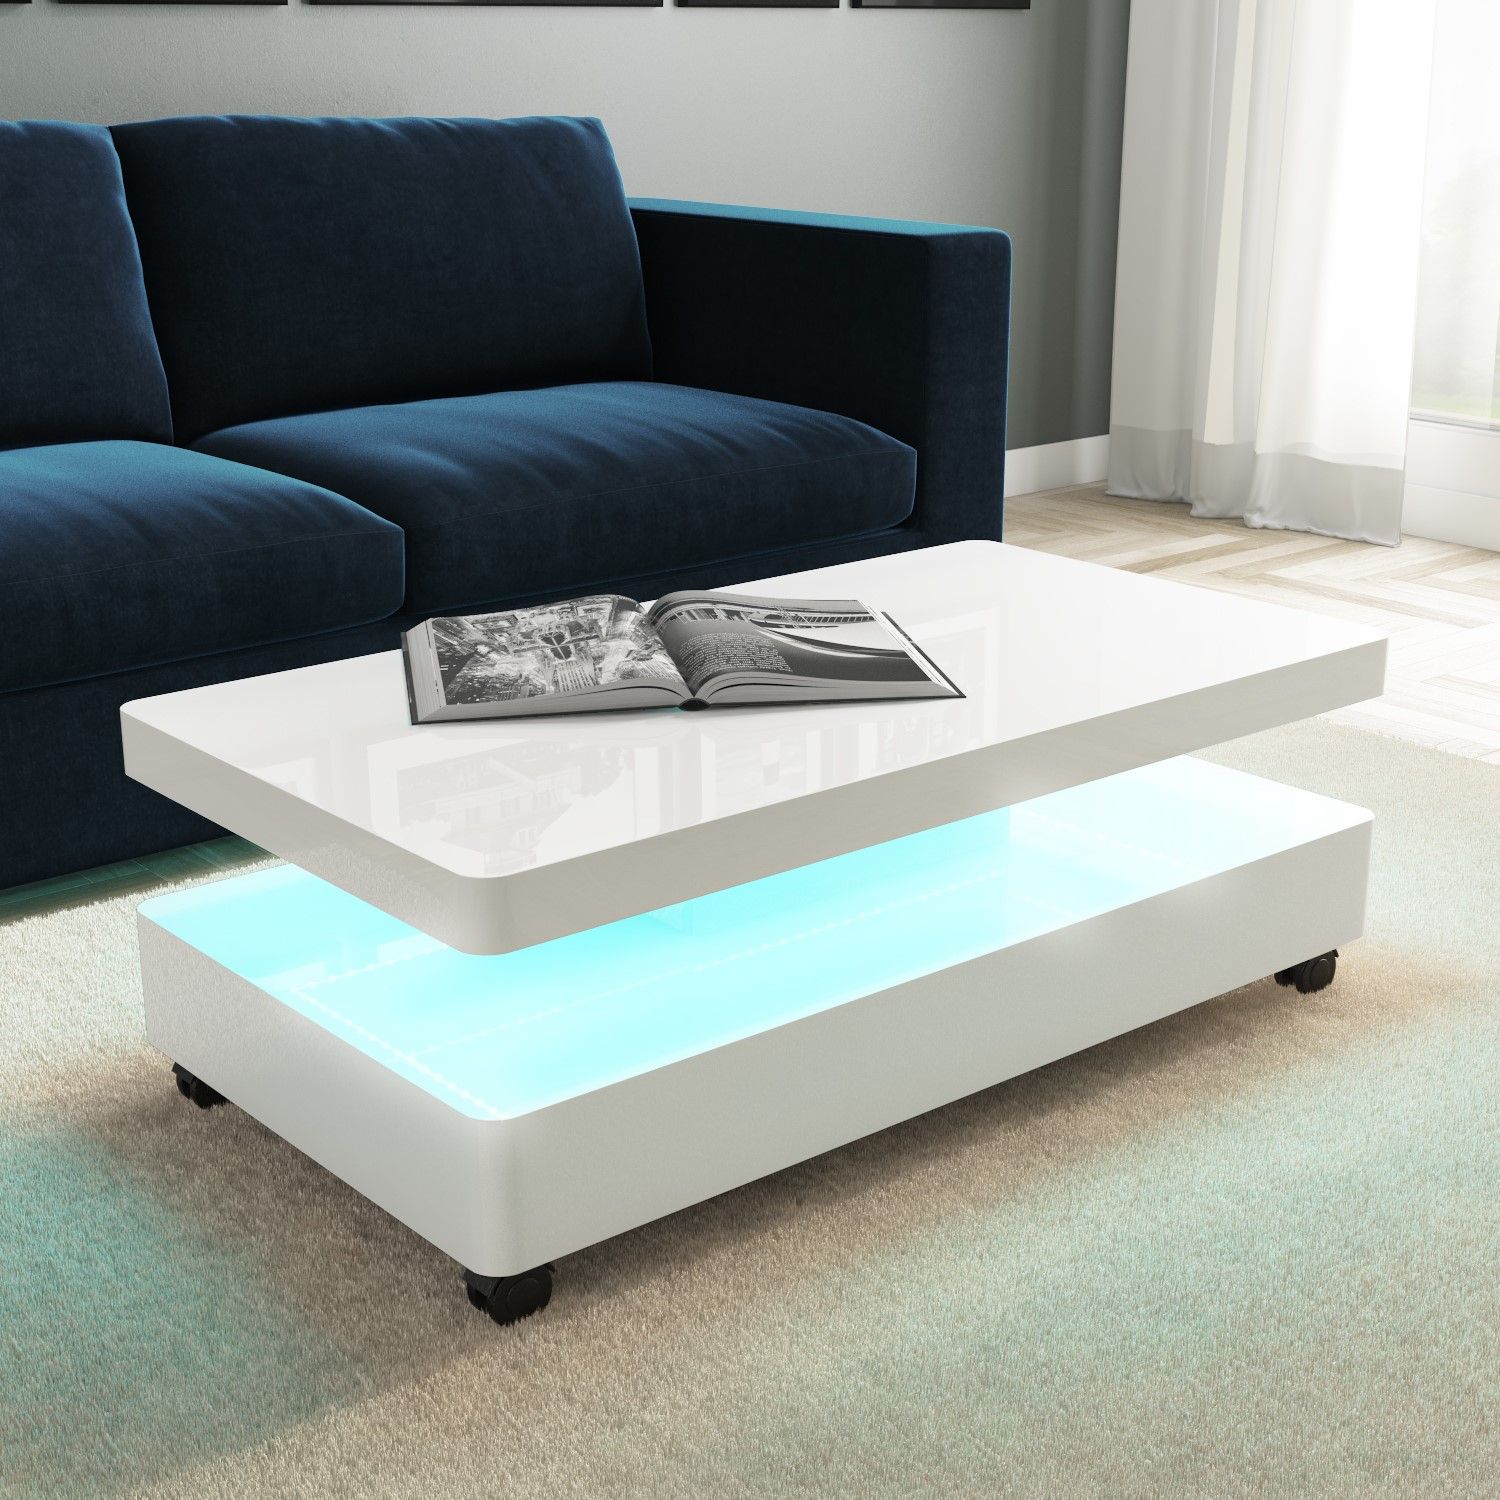 High Gloss White Coffee Table With Led Lighting 5060388562168 | Ebay Inside Coffee Tables With Led Lights (View 8 of 15)